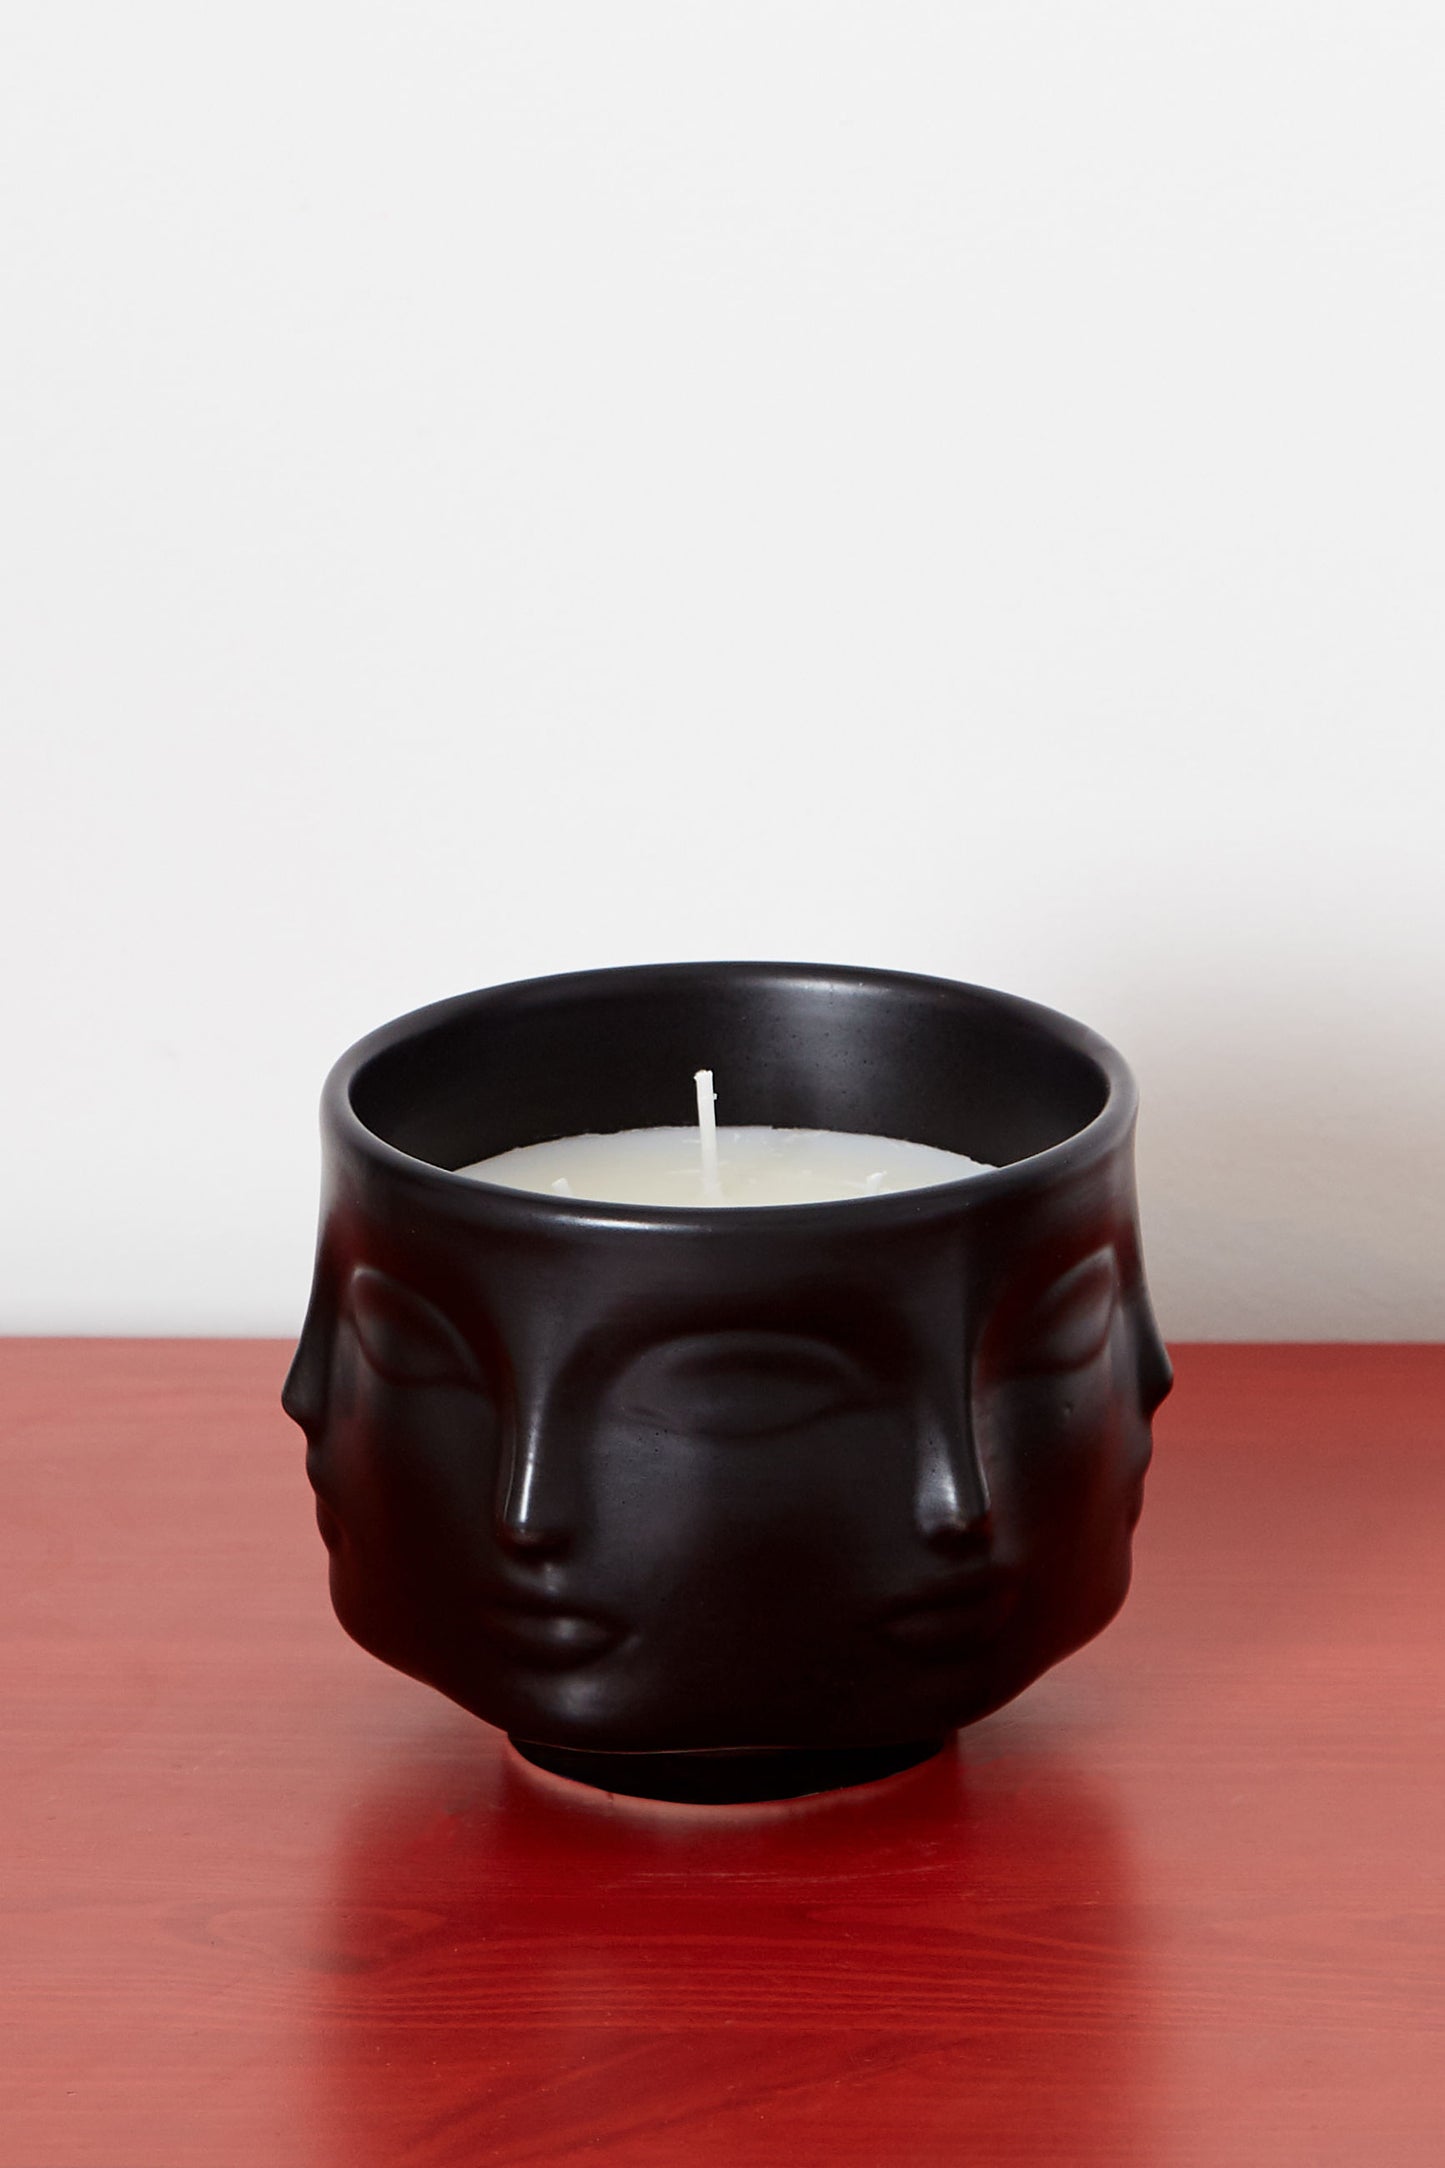 Relief Face Black Orchid Scented Candle